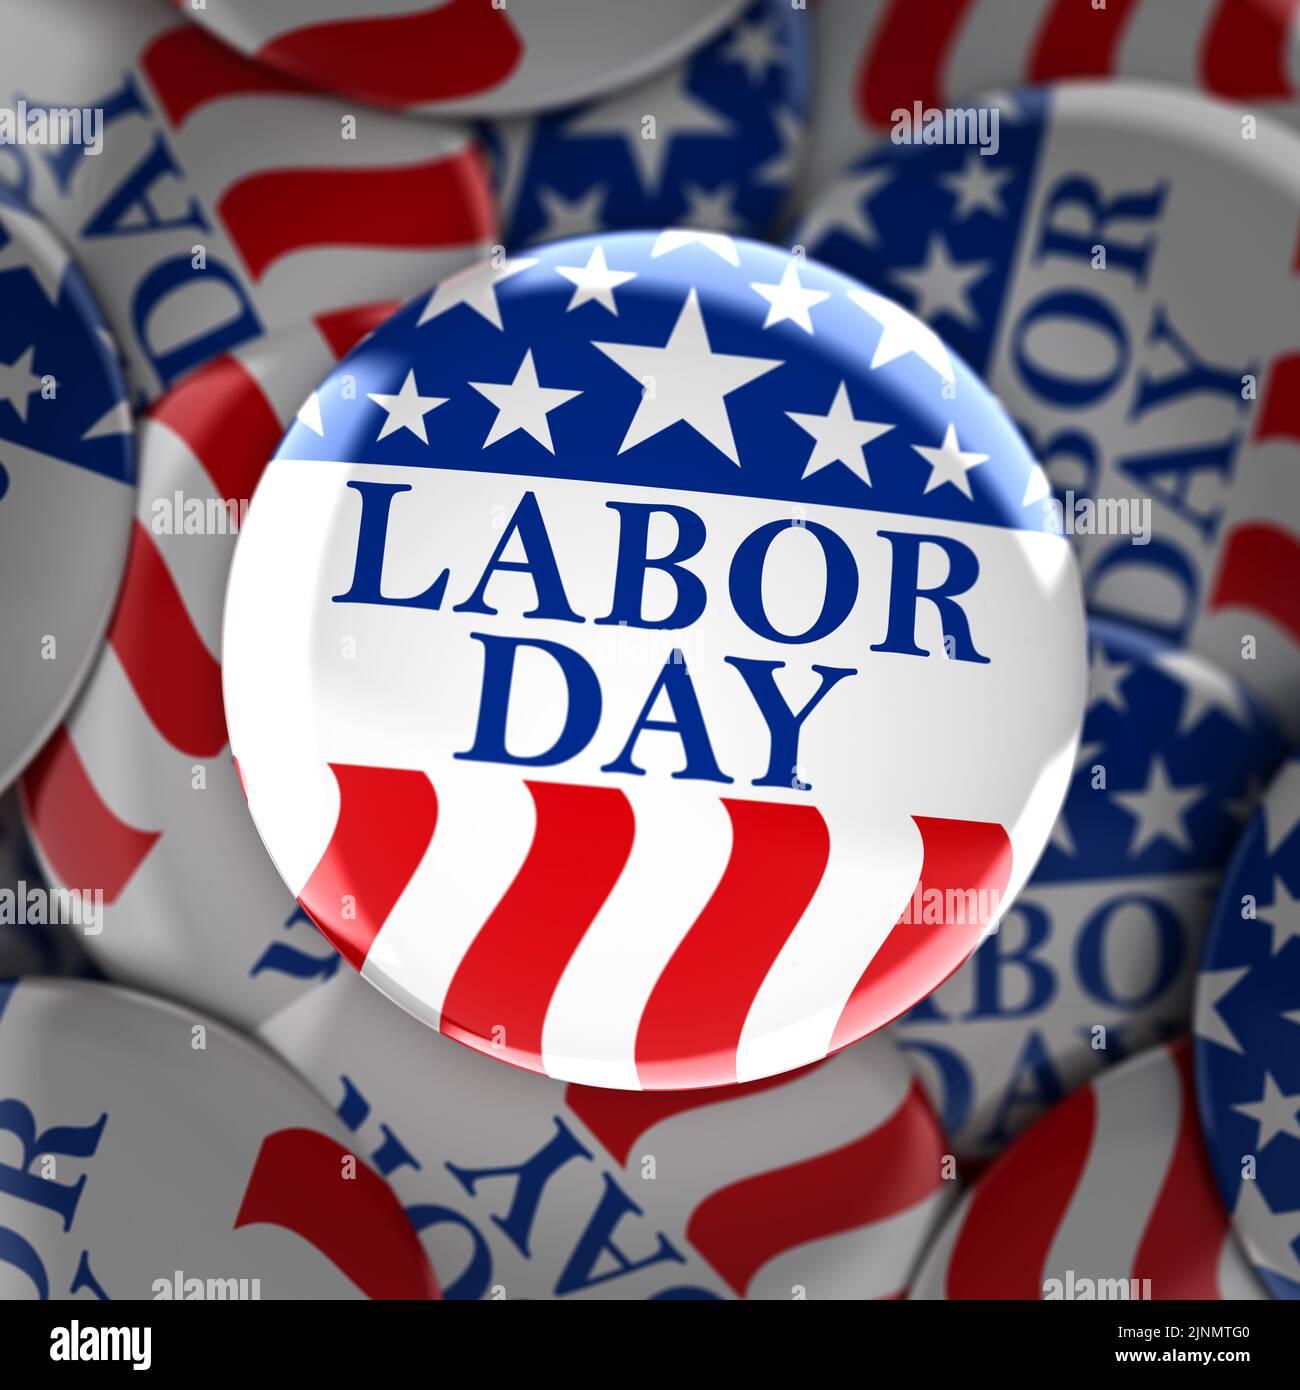 Labor day button background Stock Photo